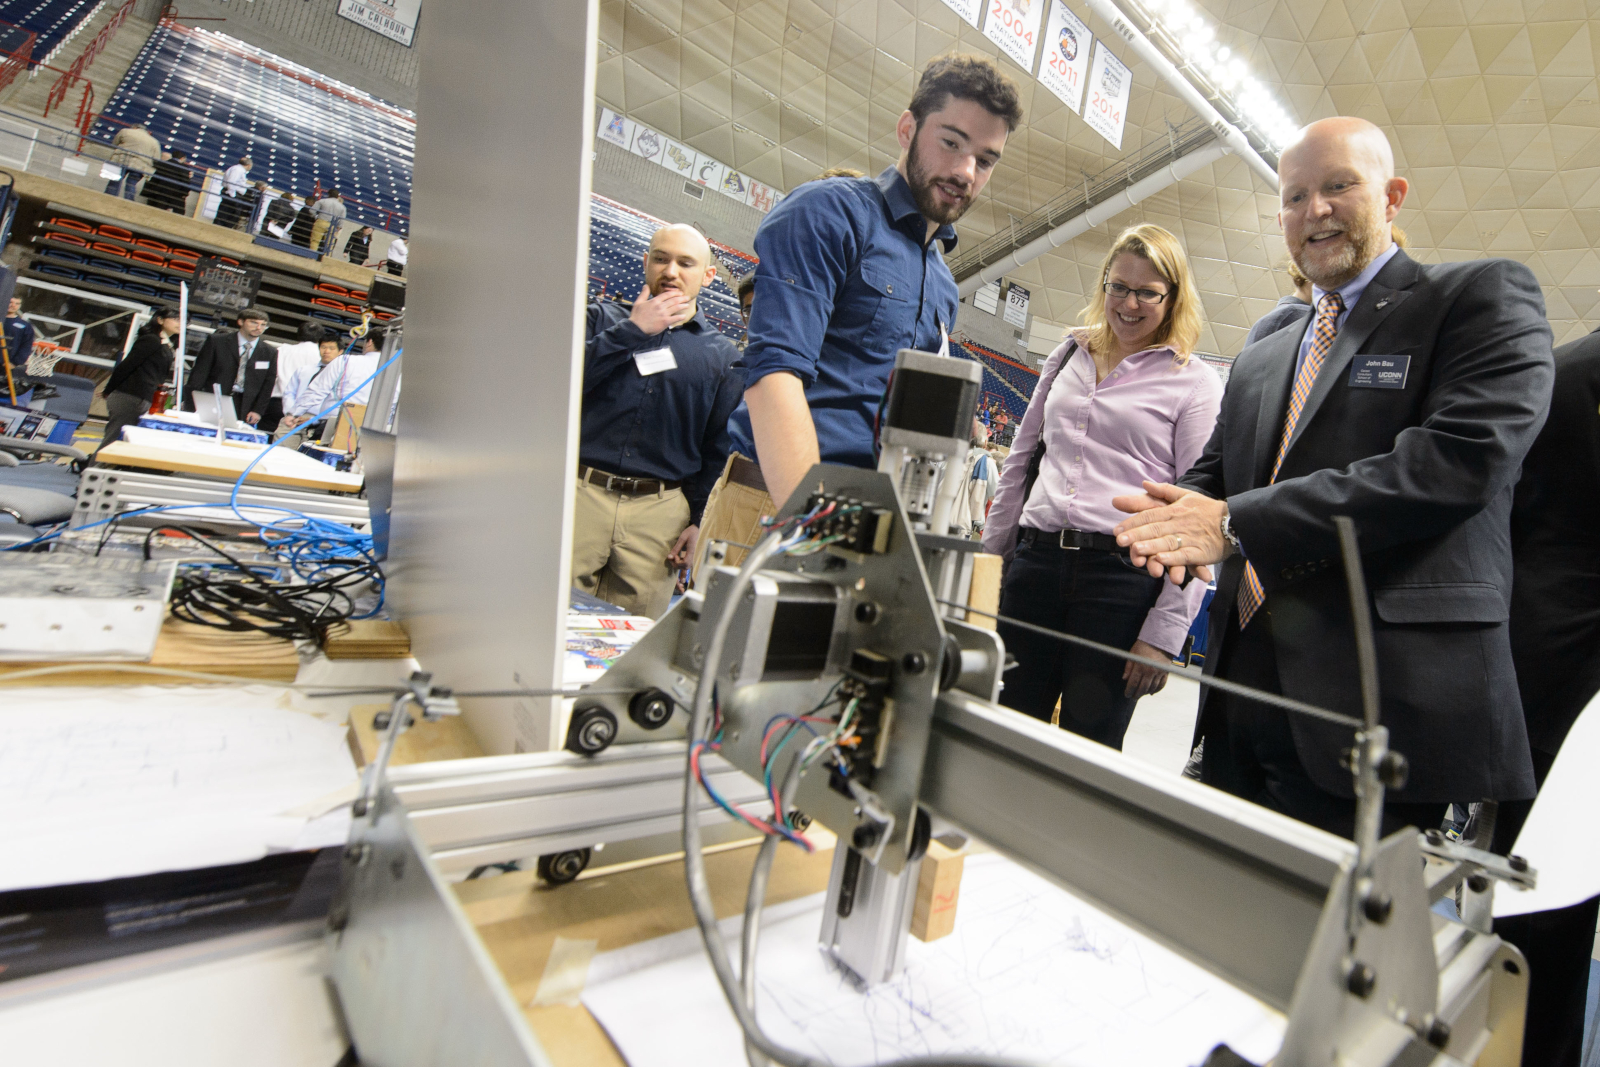 Dillon Jones '16 (ENG), left, talks with John Bau, director of the center for career development about a modular CNC machine with an open source web interface during the School of Engineering Senior Design Expo held at Gampel Pavilion on May 1, 2015. (Peter Morenus/UConn Photo)